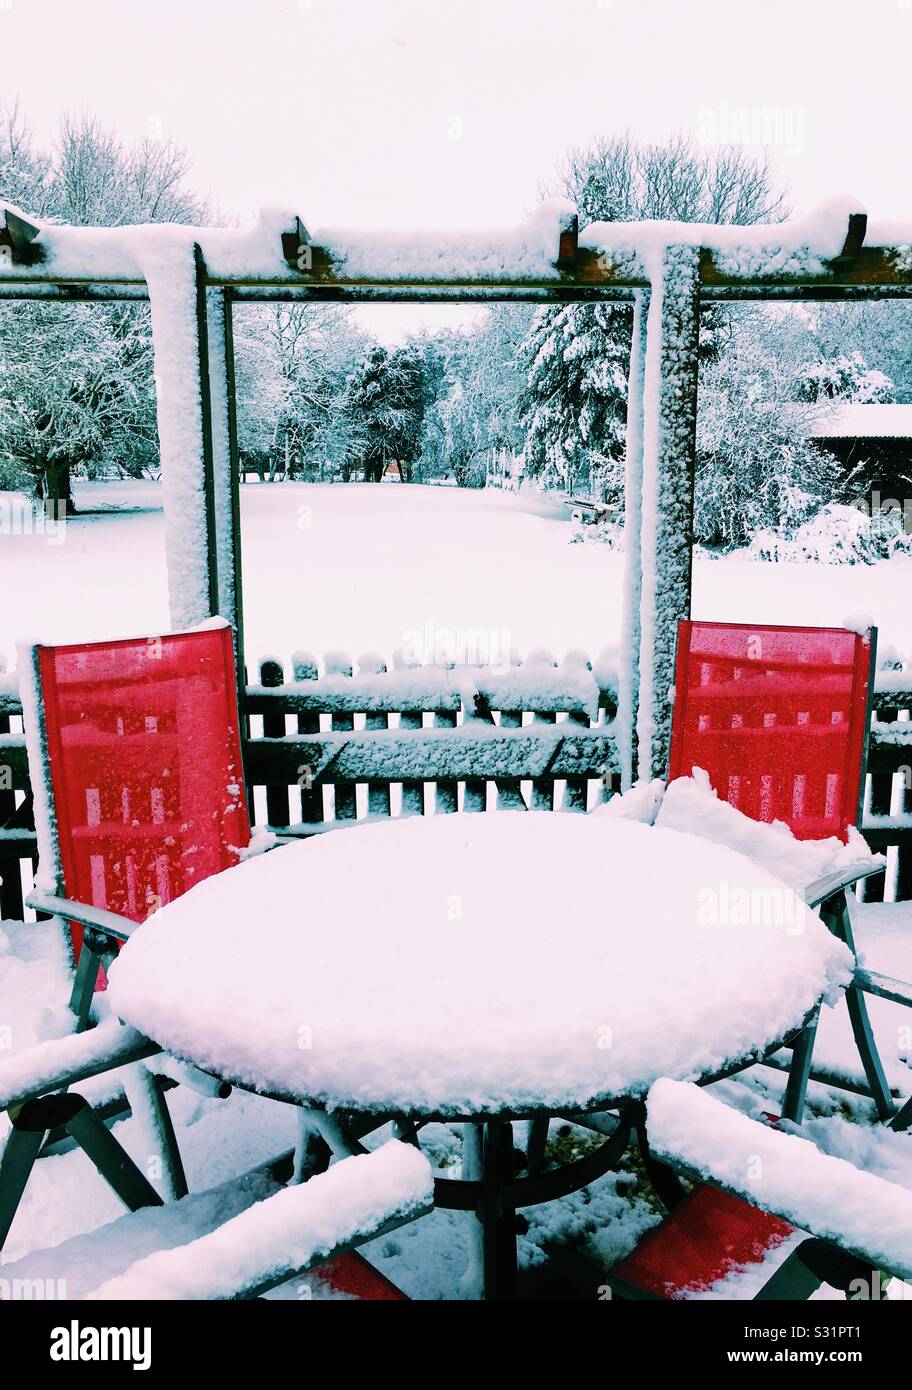 Table and red chairs covered in snow with large garden in background Stock Photo